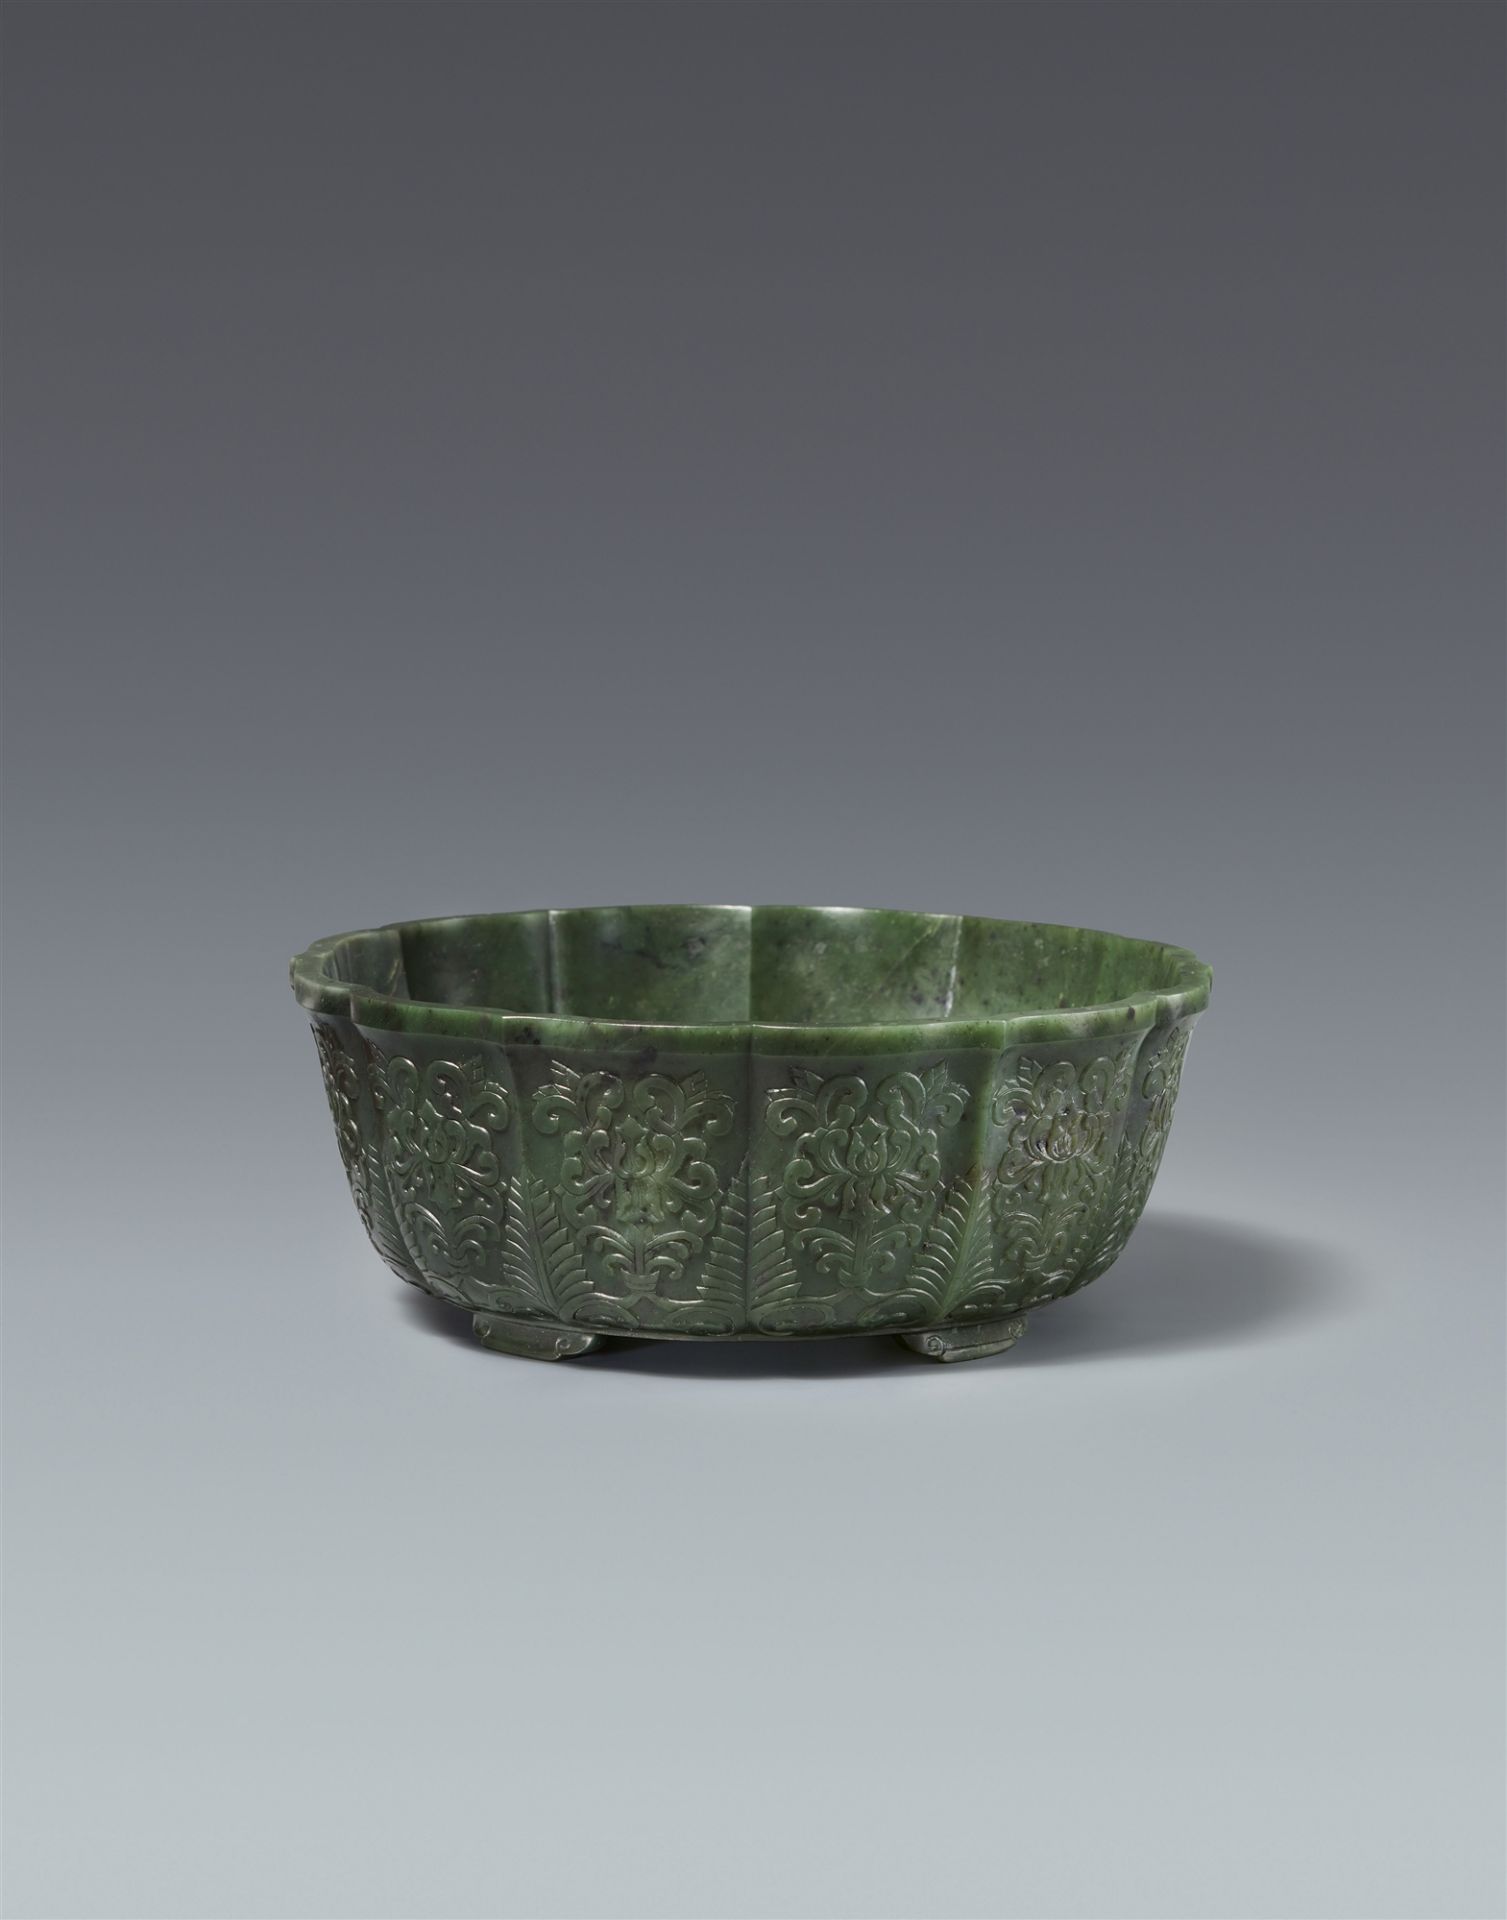 A spinach-green jade Mughal-style bowl. Qing dynasty